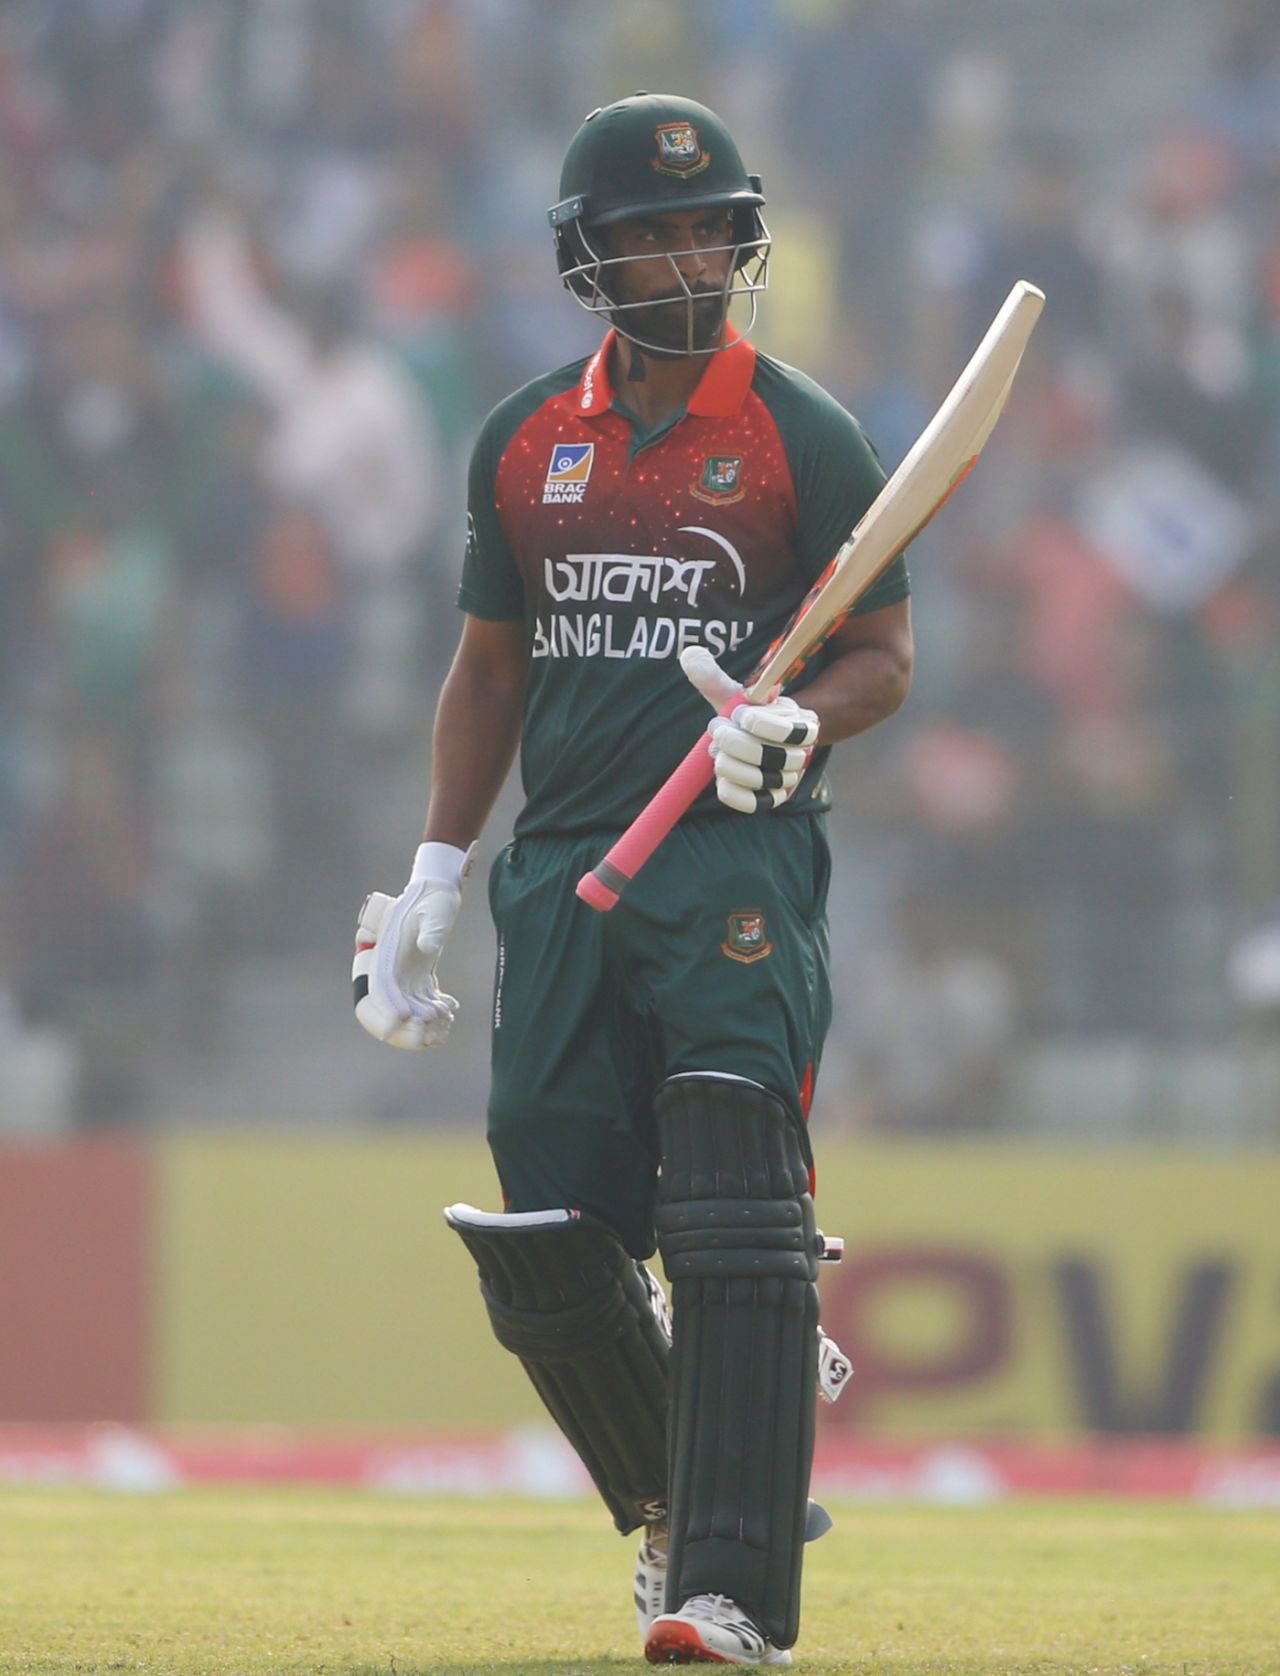 Tamim Iqbal acknowledges the crowd after his century, Bangladesh v Zimbabwe, 2nd ODI, Sylhet, March 3, 2020